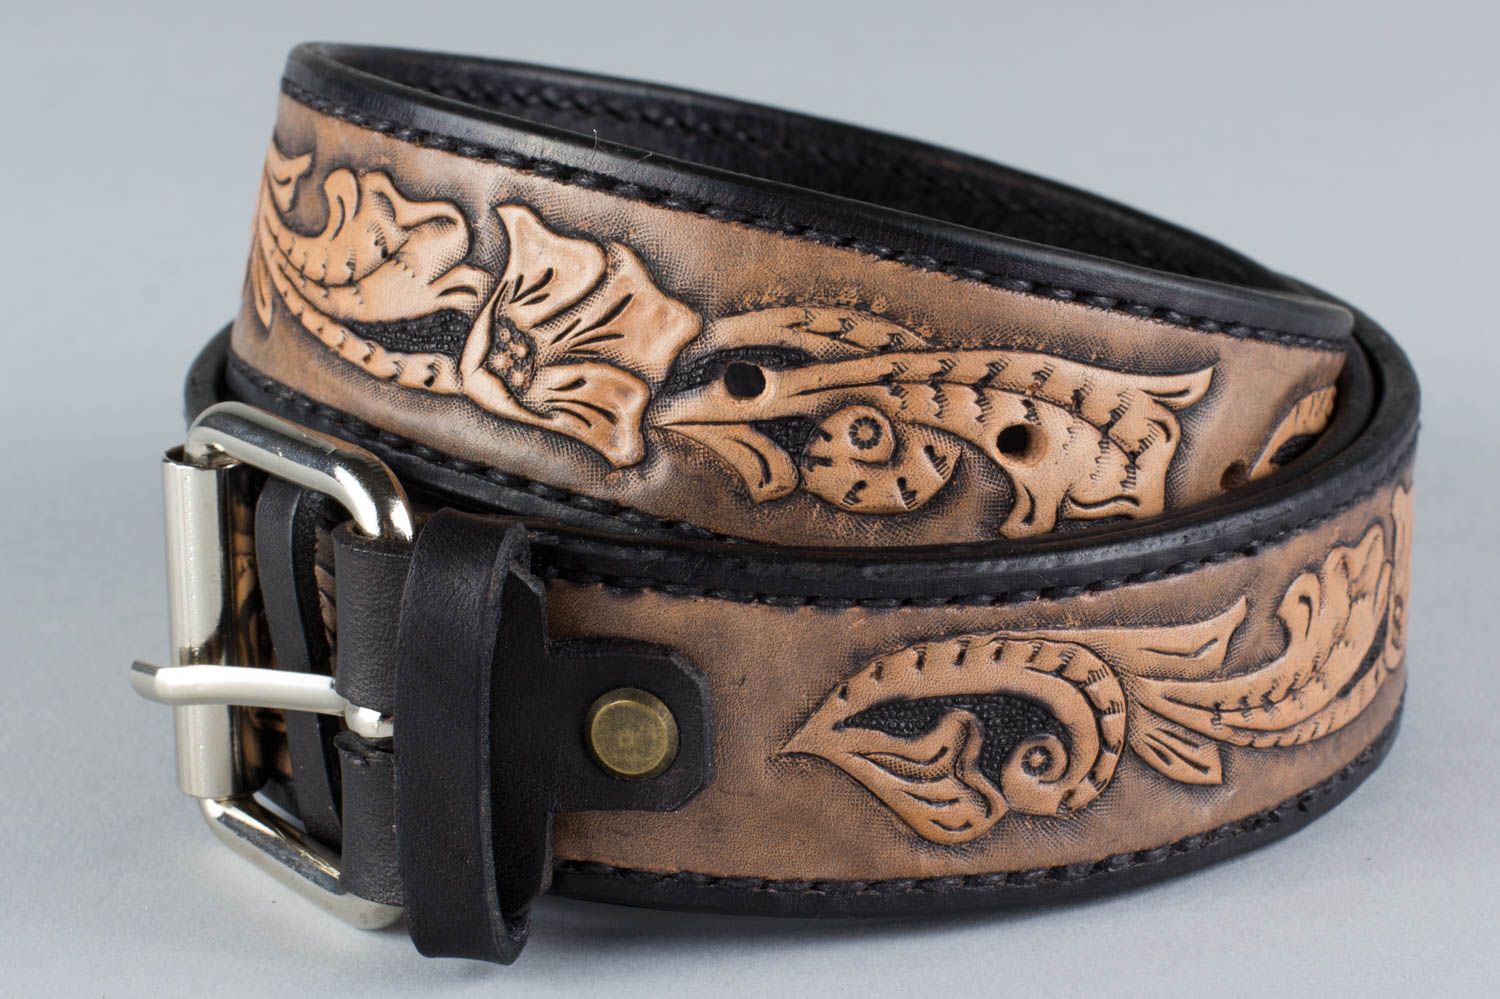 Handmade belt made of natural leather with metal buckle in Sheridan style photo 4